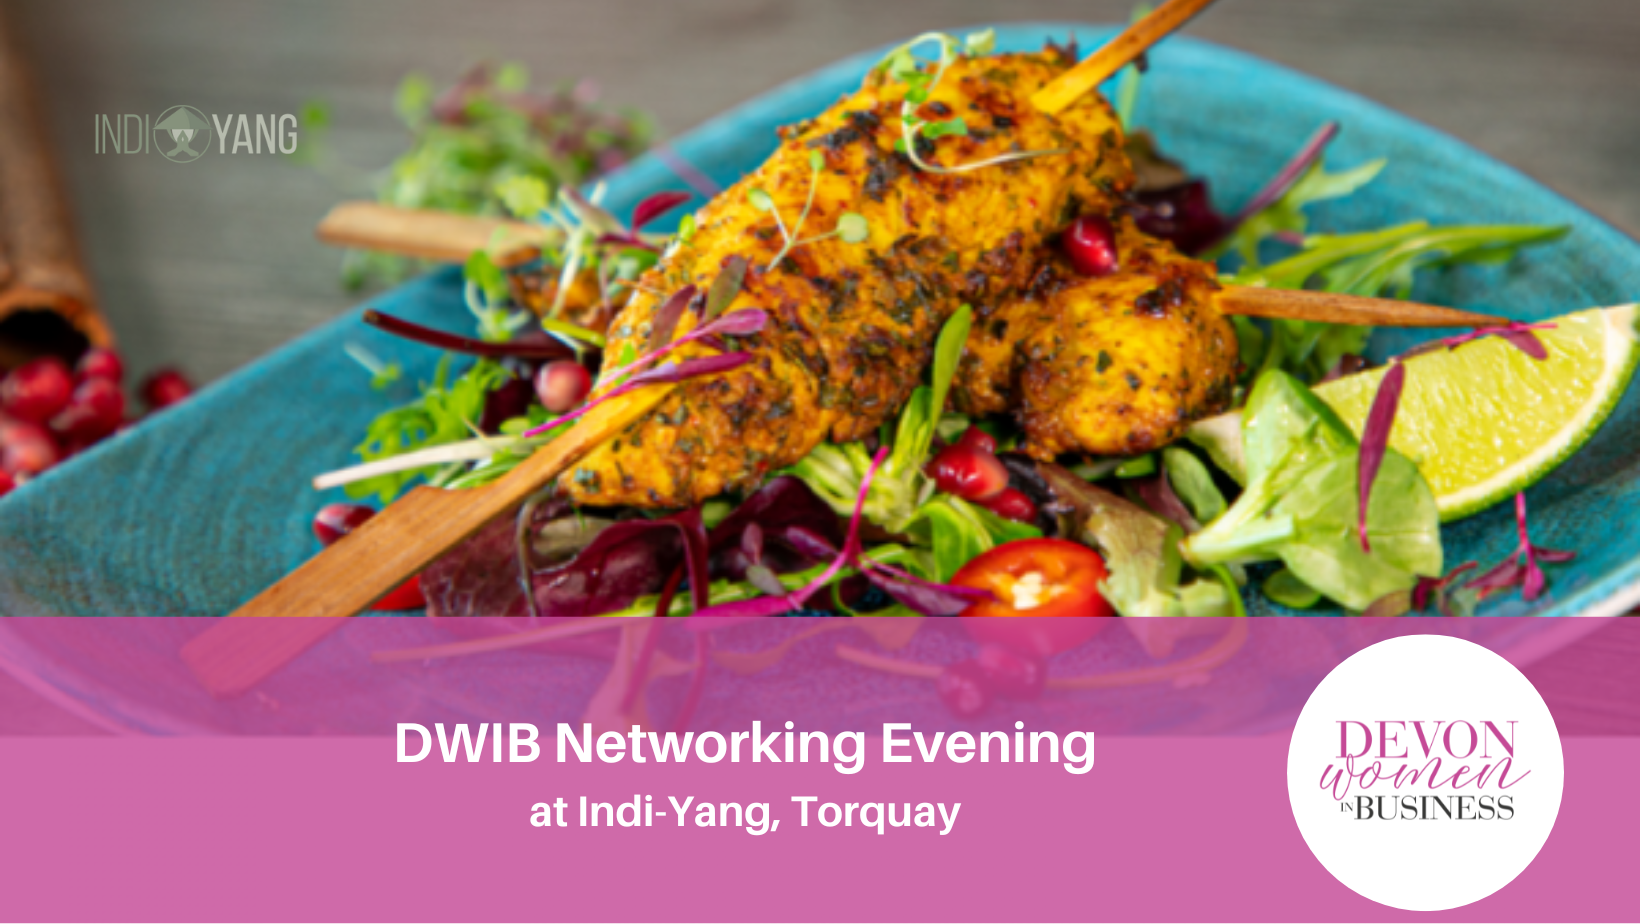 Photograph of Thai Chicken Fillet skewers on a turquoise plate. Pink banner at the bottom with wording: DWIB Networking Evening at Indi-Yang, Torquay.